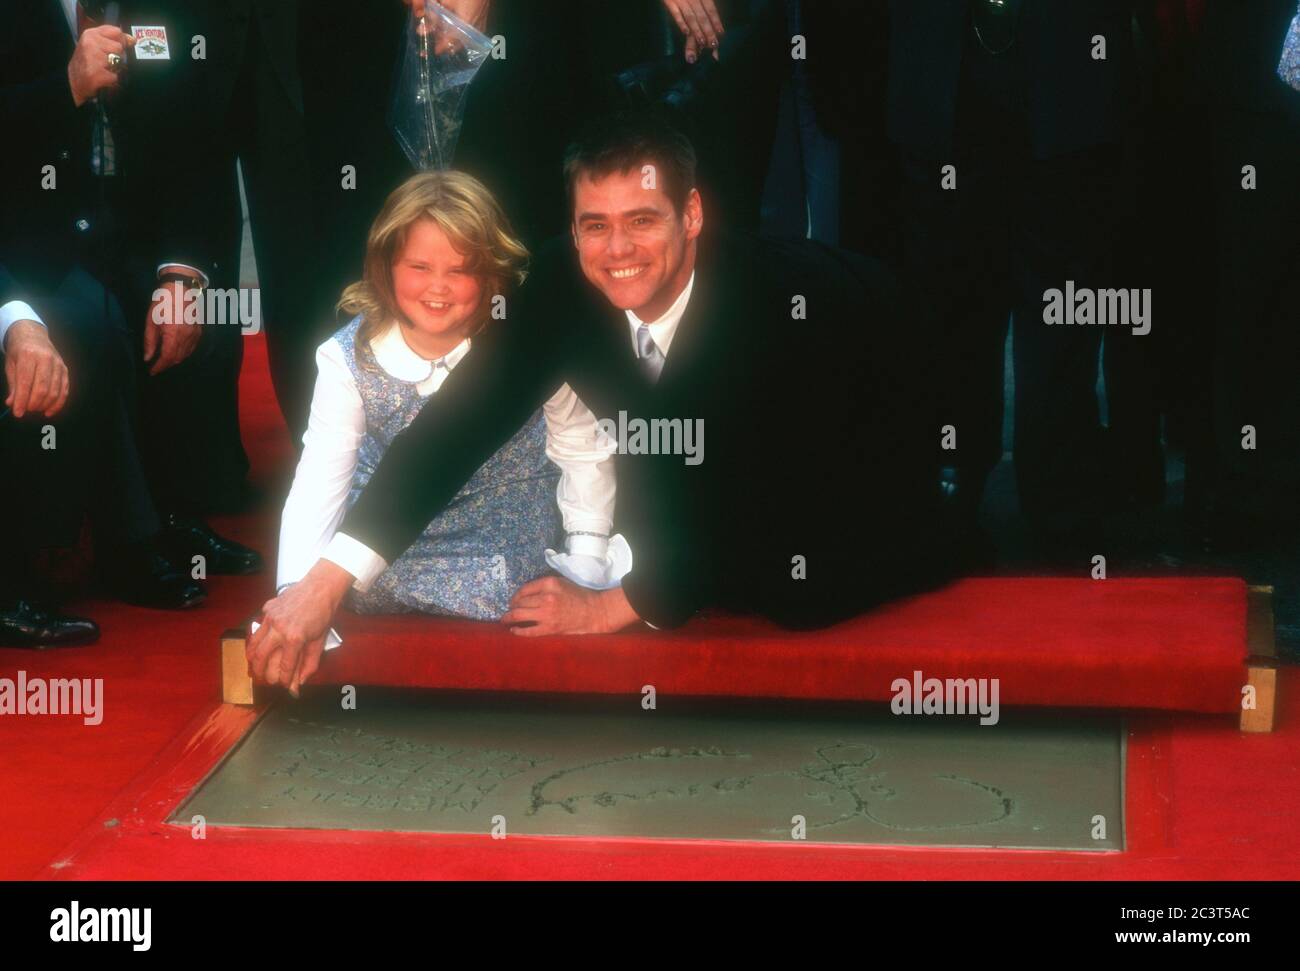 Hollywood, California, USA 2nd November 1995 Actor Jim Carrey and daughter Jane Carrey attend Jim Carrey's hand and footprint in cement ceremony on November 2, 1995 at Mann's Chinese Theatre in Hollywood, California, USA. Photo by Barry King/Alamy Stock Photo Stock Photo